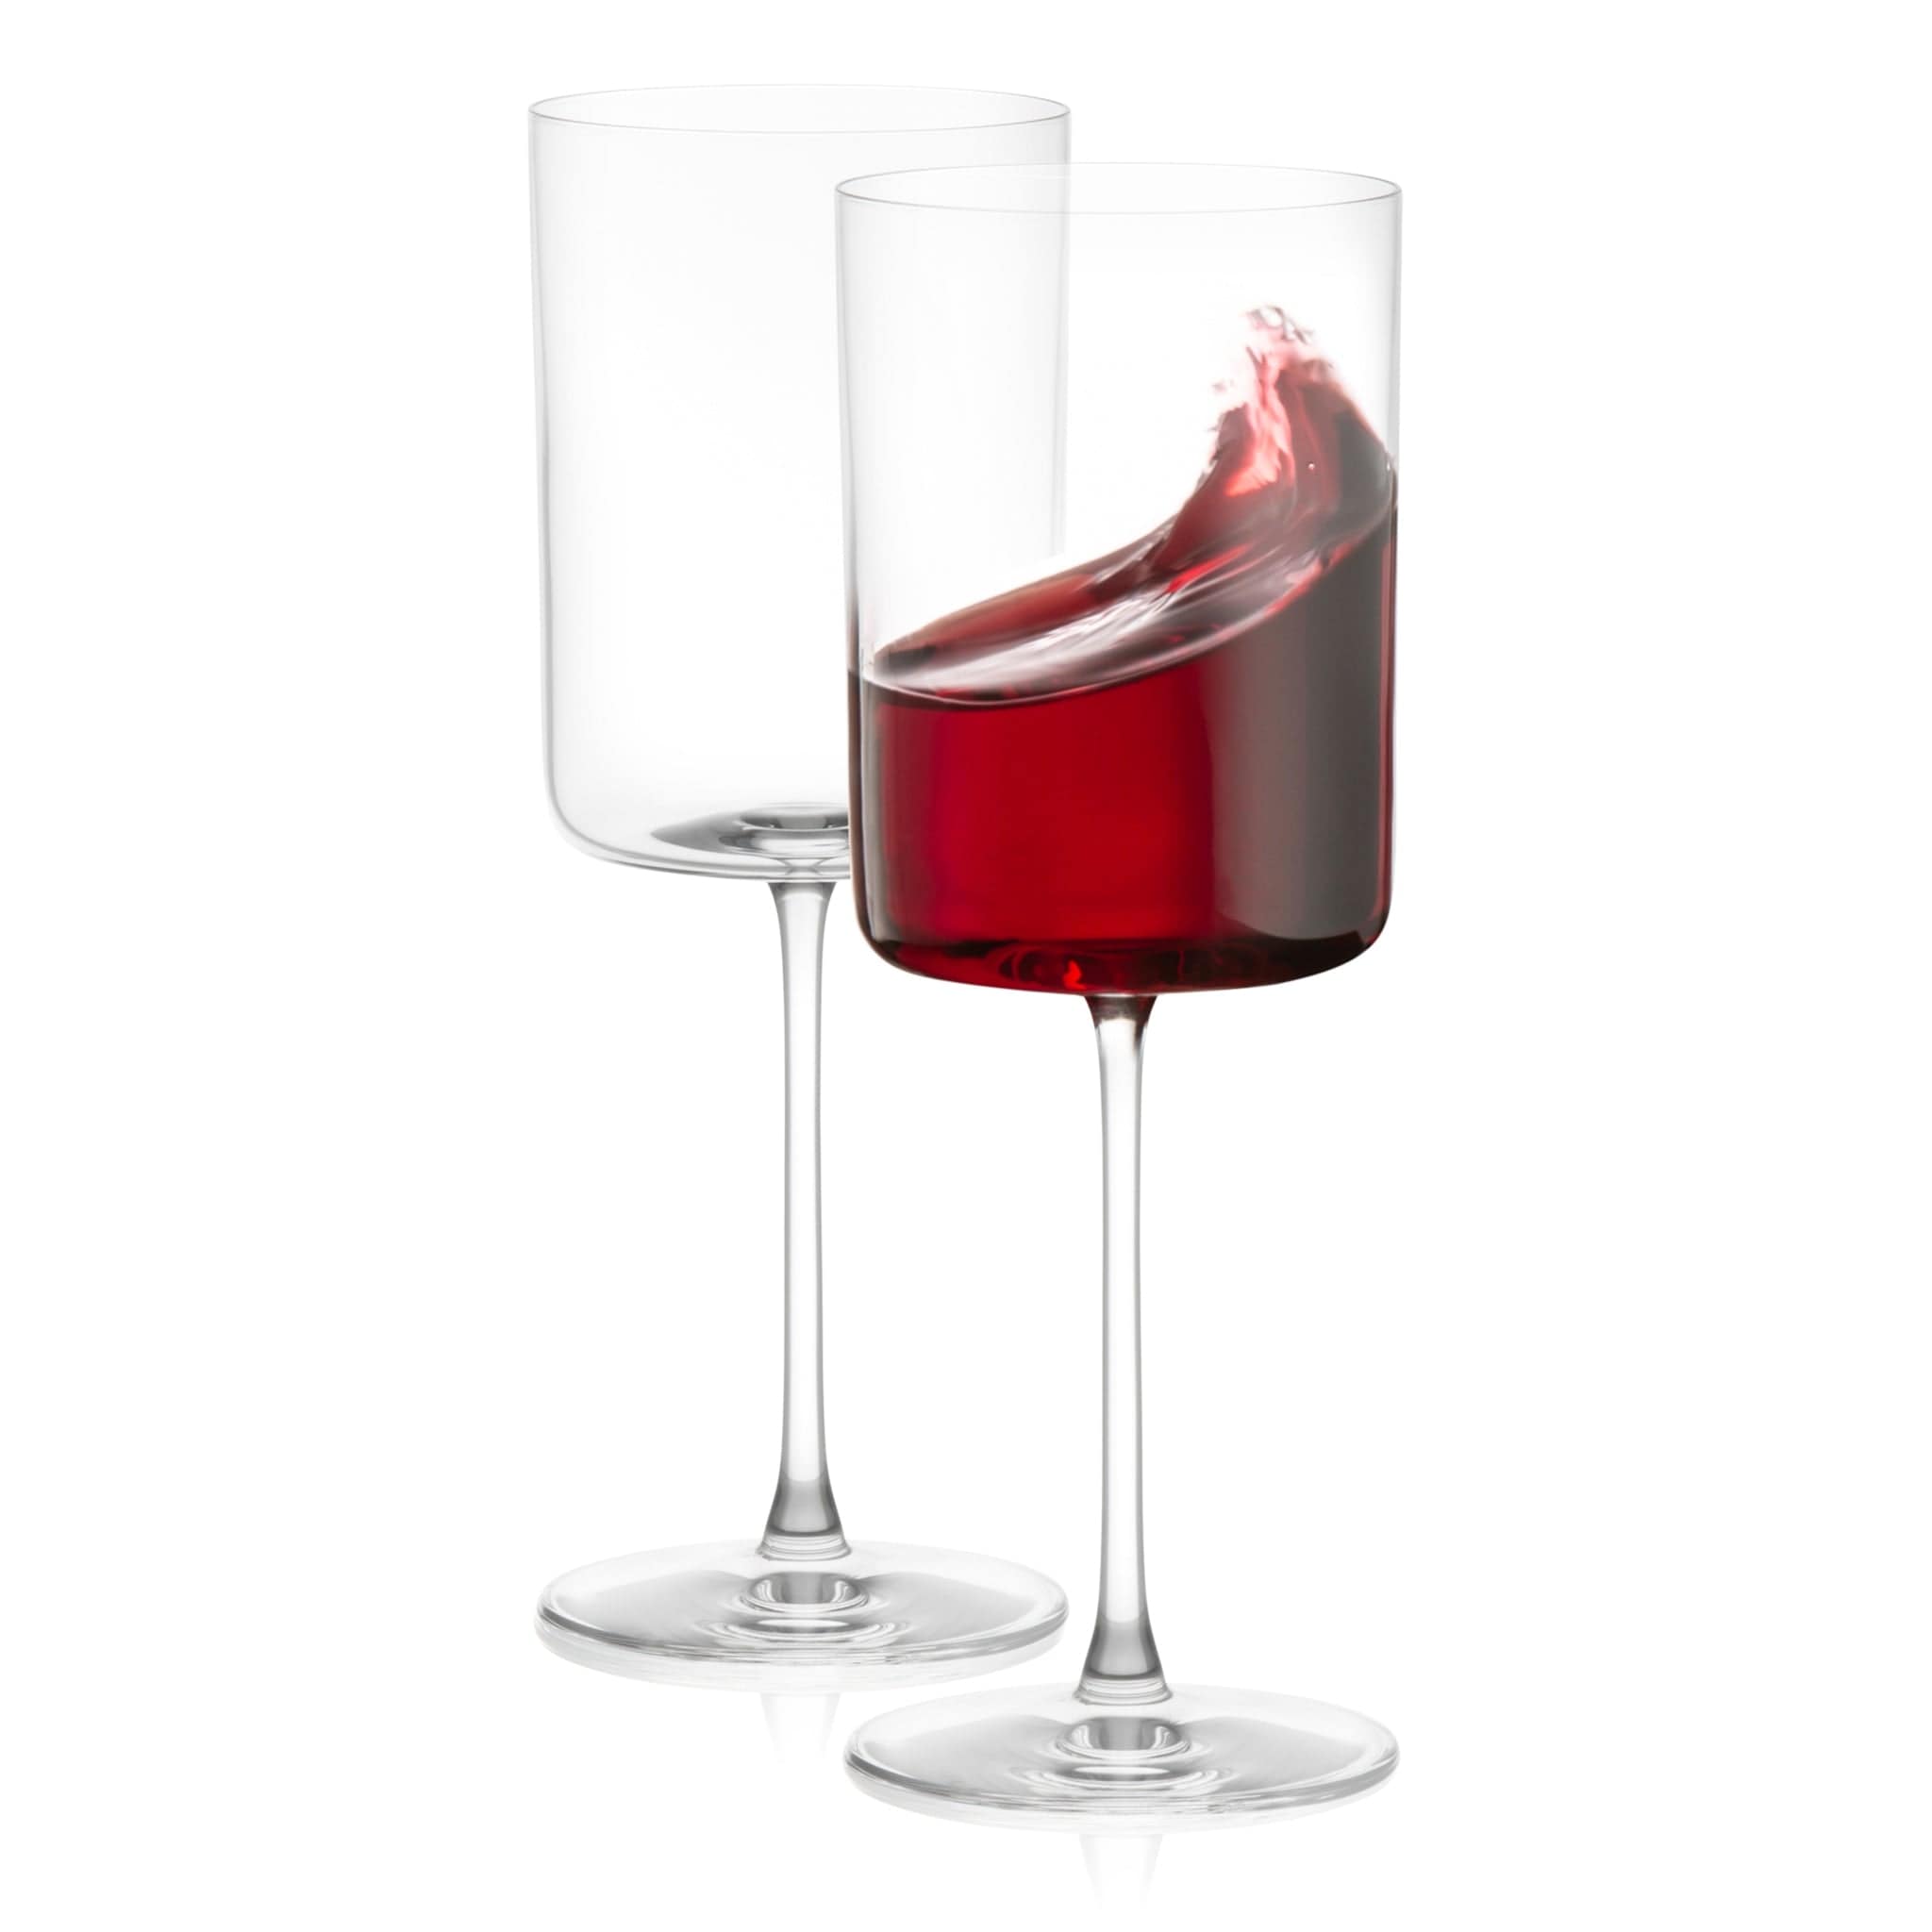 https://ak1.ostkcdn.com/images/products/is/images/direct/4fc74e8a27af100b0f36fca472b09d6b32723ced/JoyJolt-Claire-European-Crystal-Red-Wine-Glasses-14-oz%2C-Set-of-2.jpg